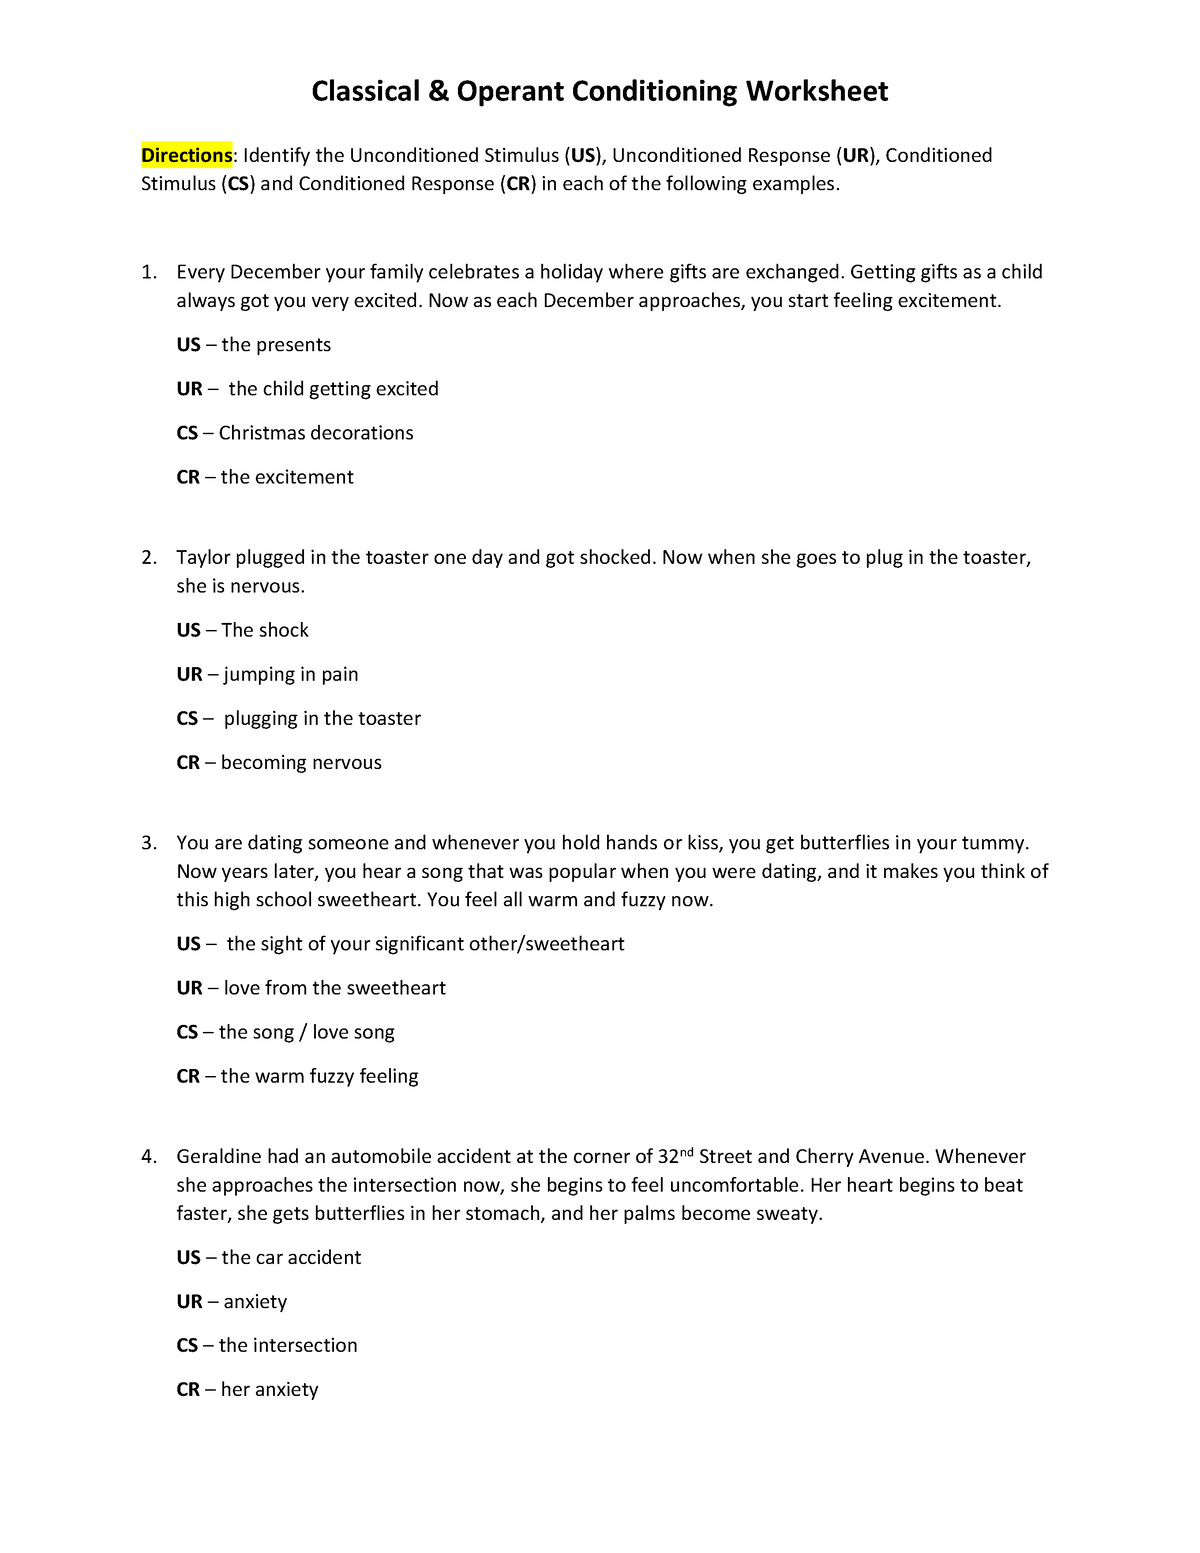 Classical and Operant Conditioning Worksheet 21 22 Classical